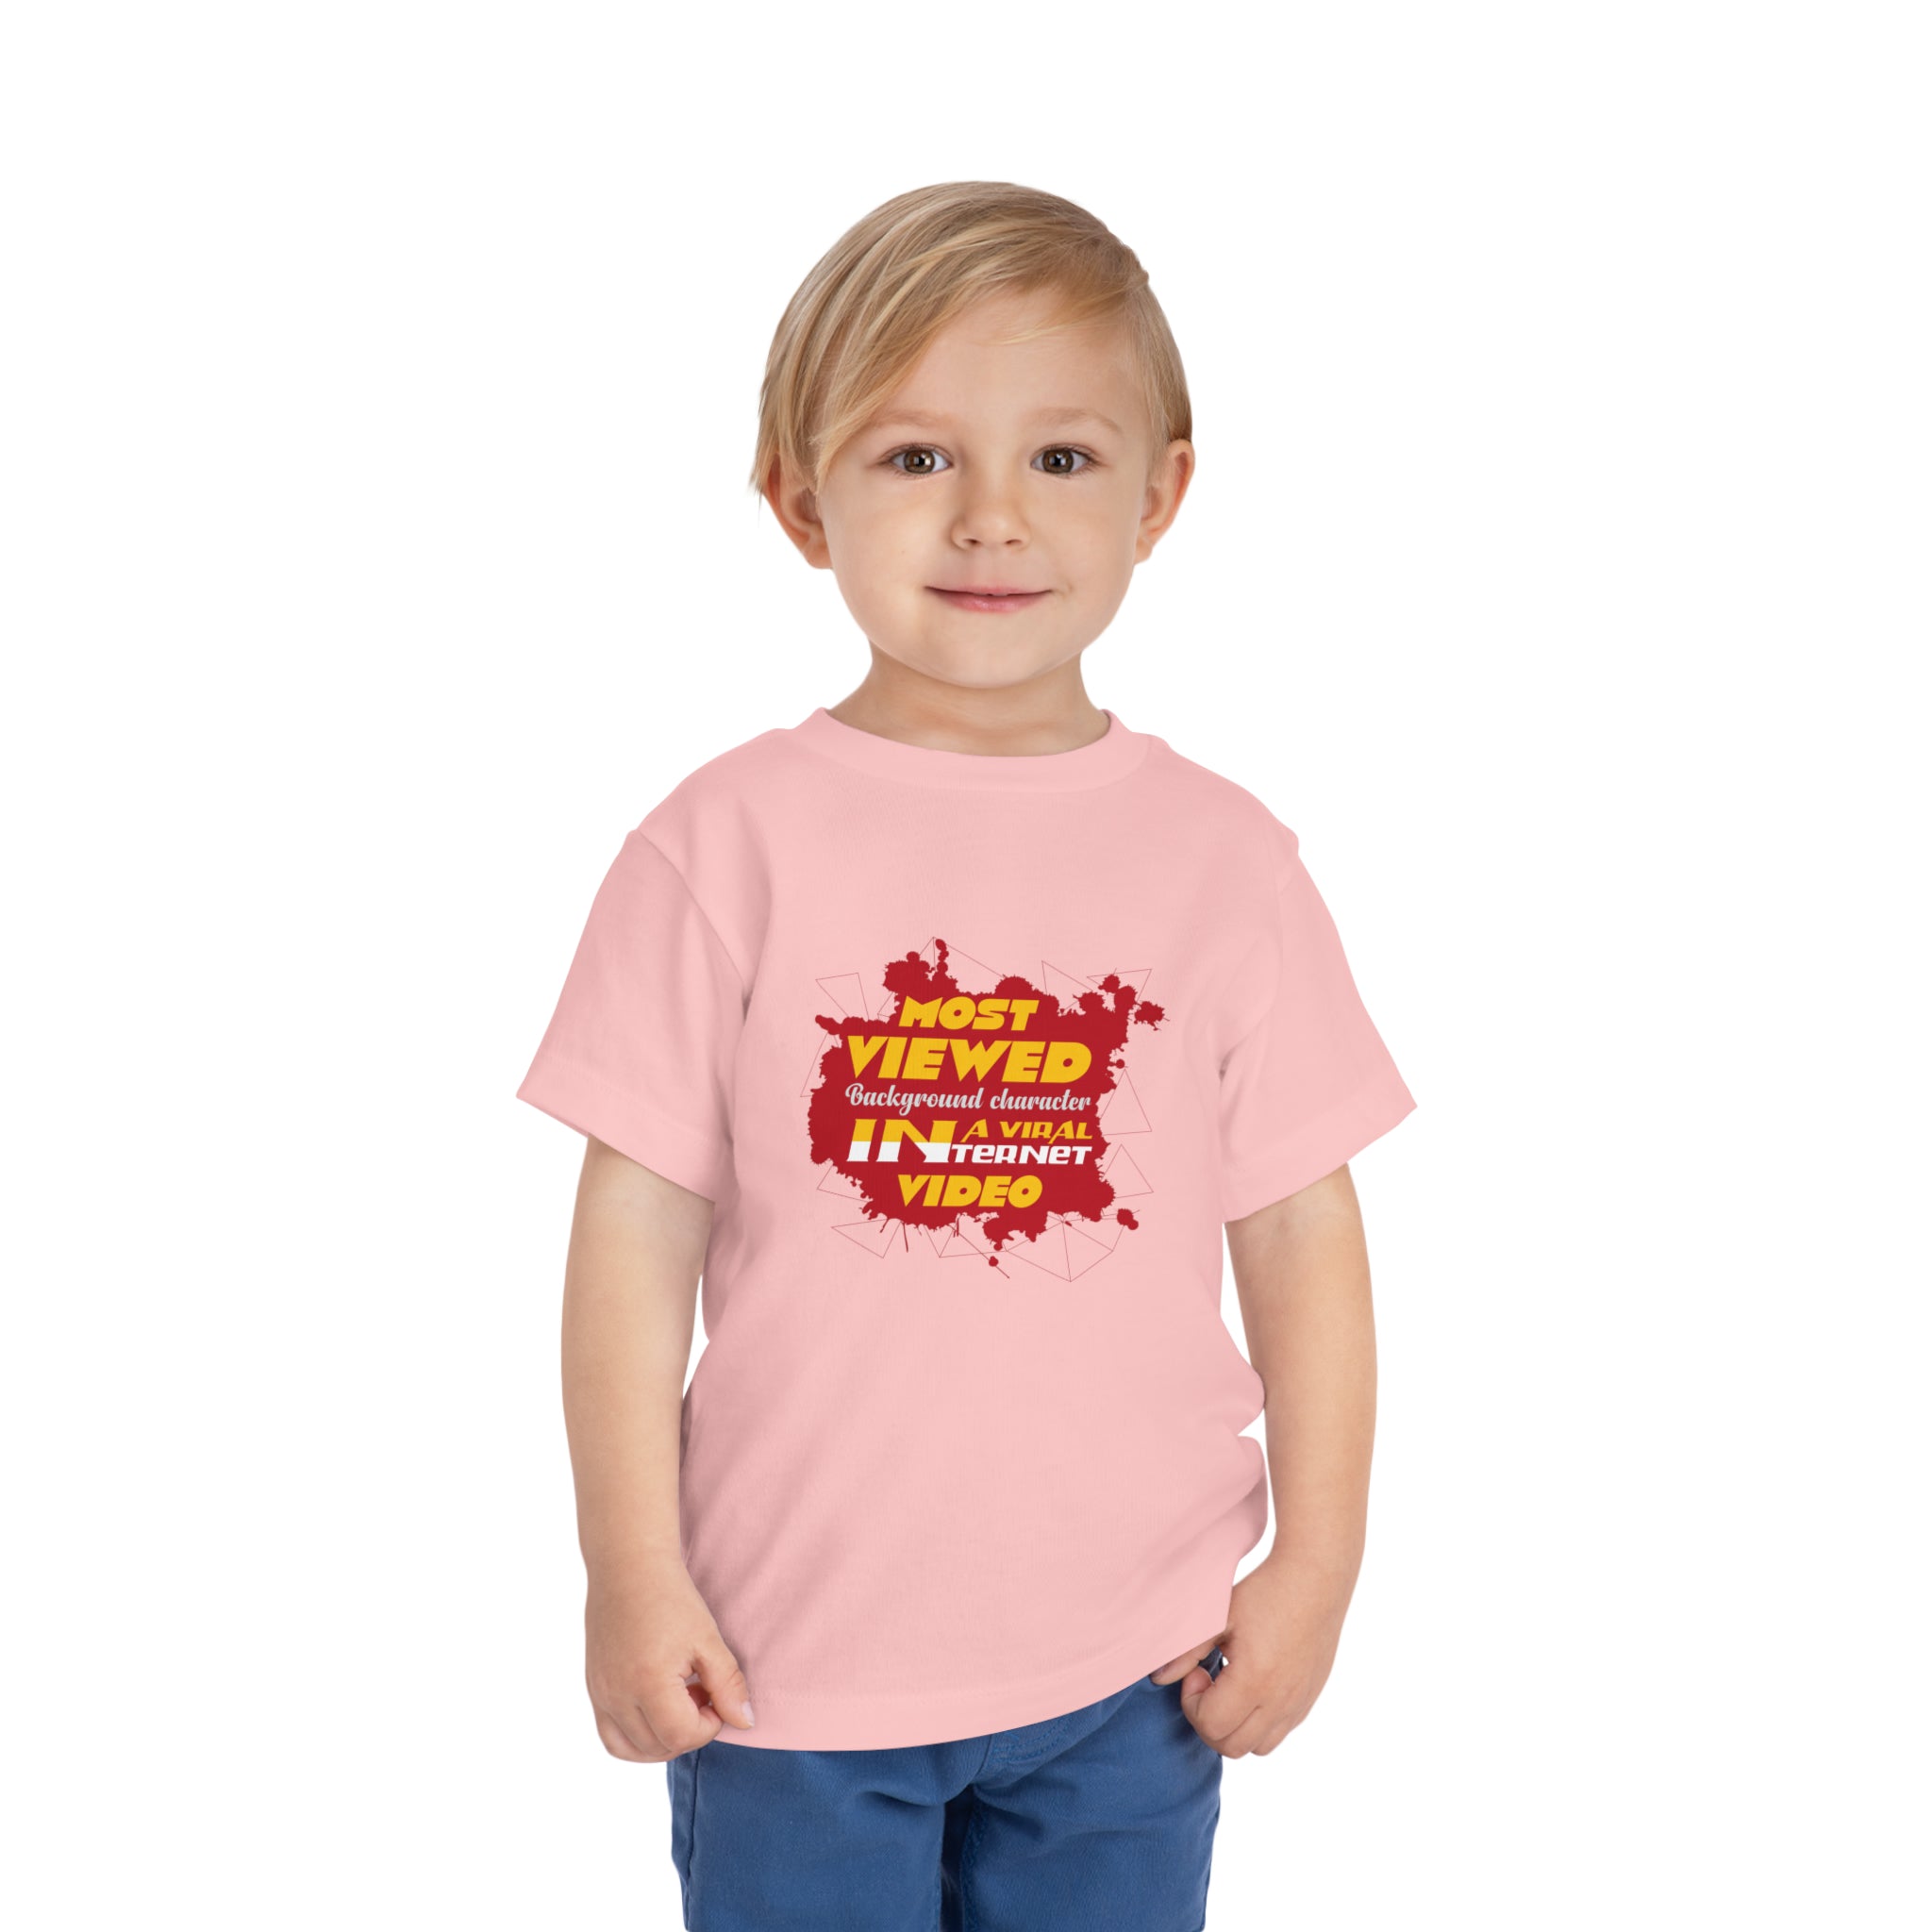 Background Character Challenge [Toddler Tee]